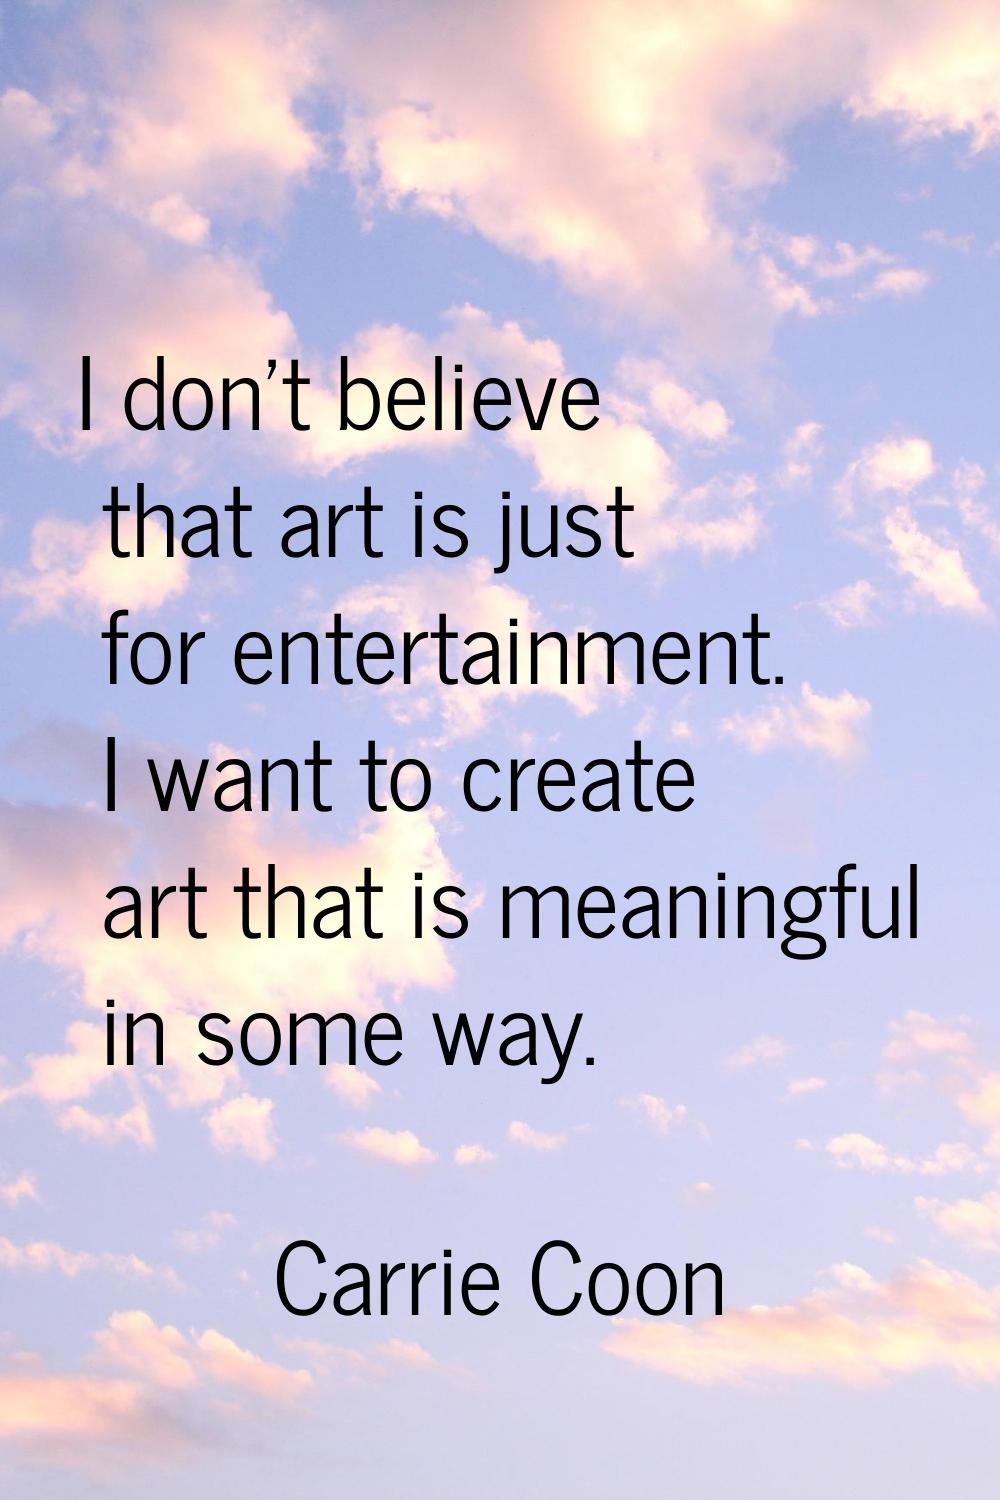 I don't believe that art is just for entertainment. I want to create art that is meaningful in some